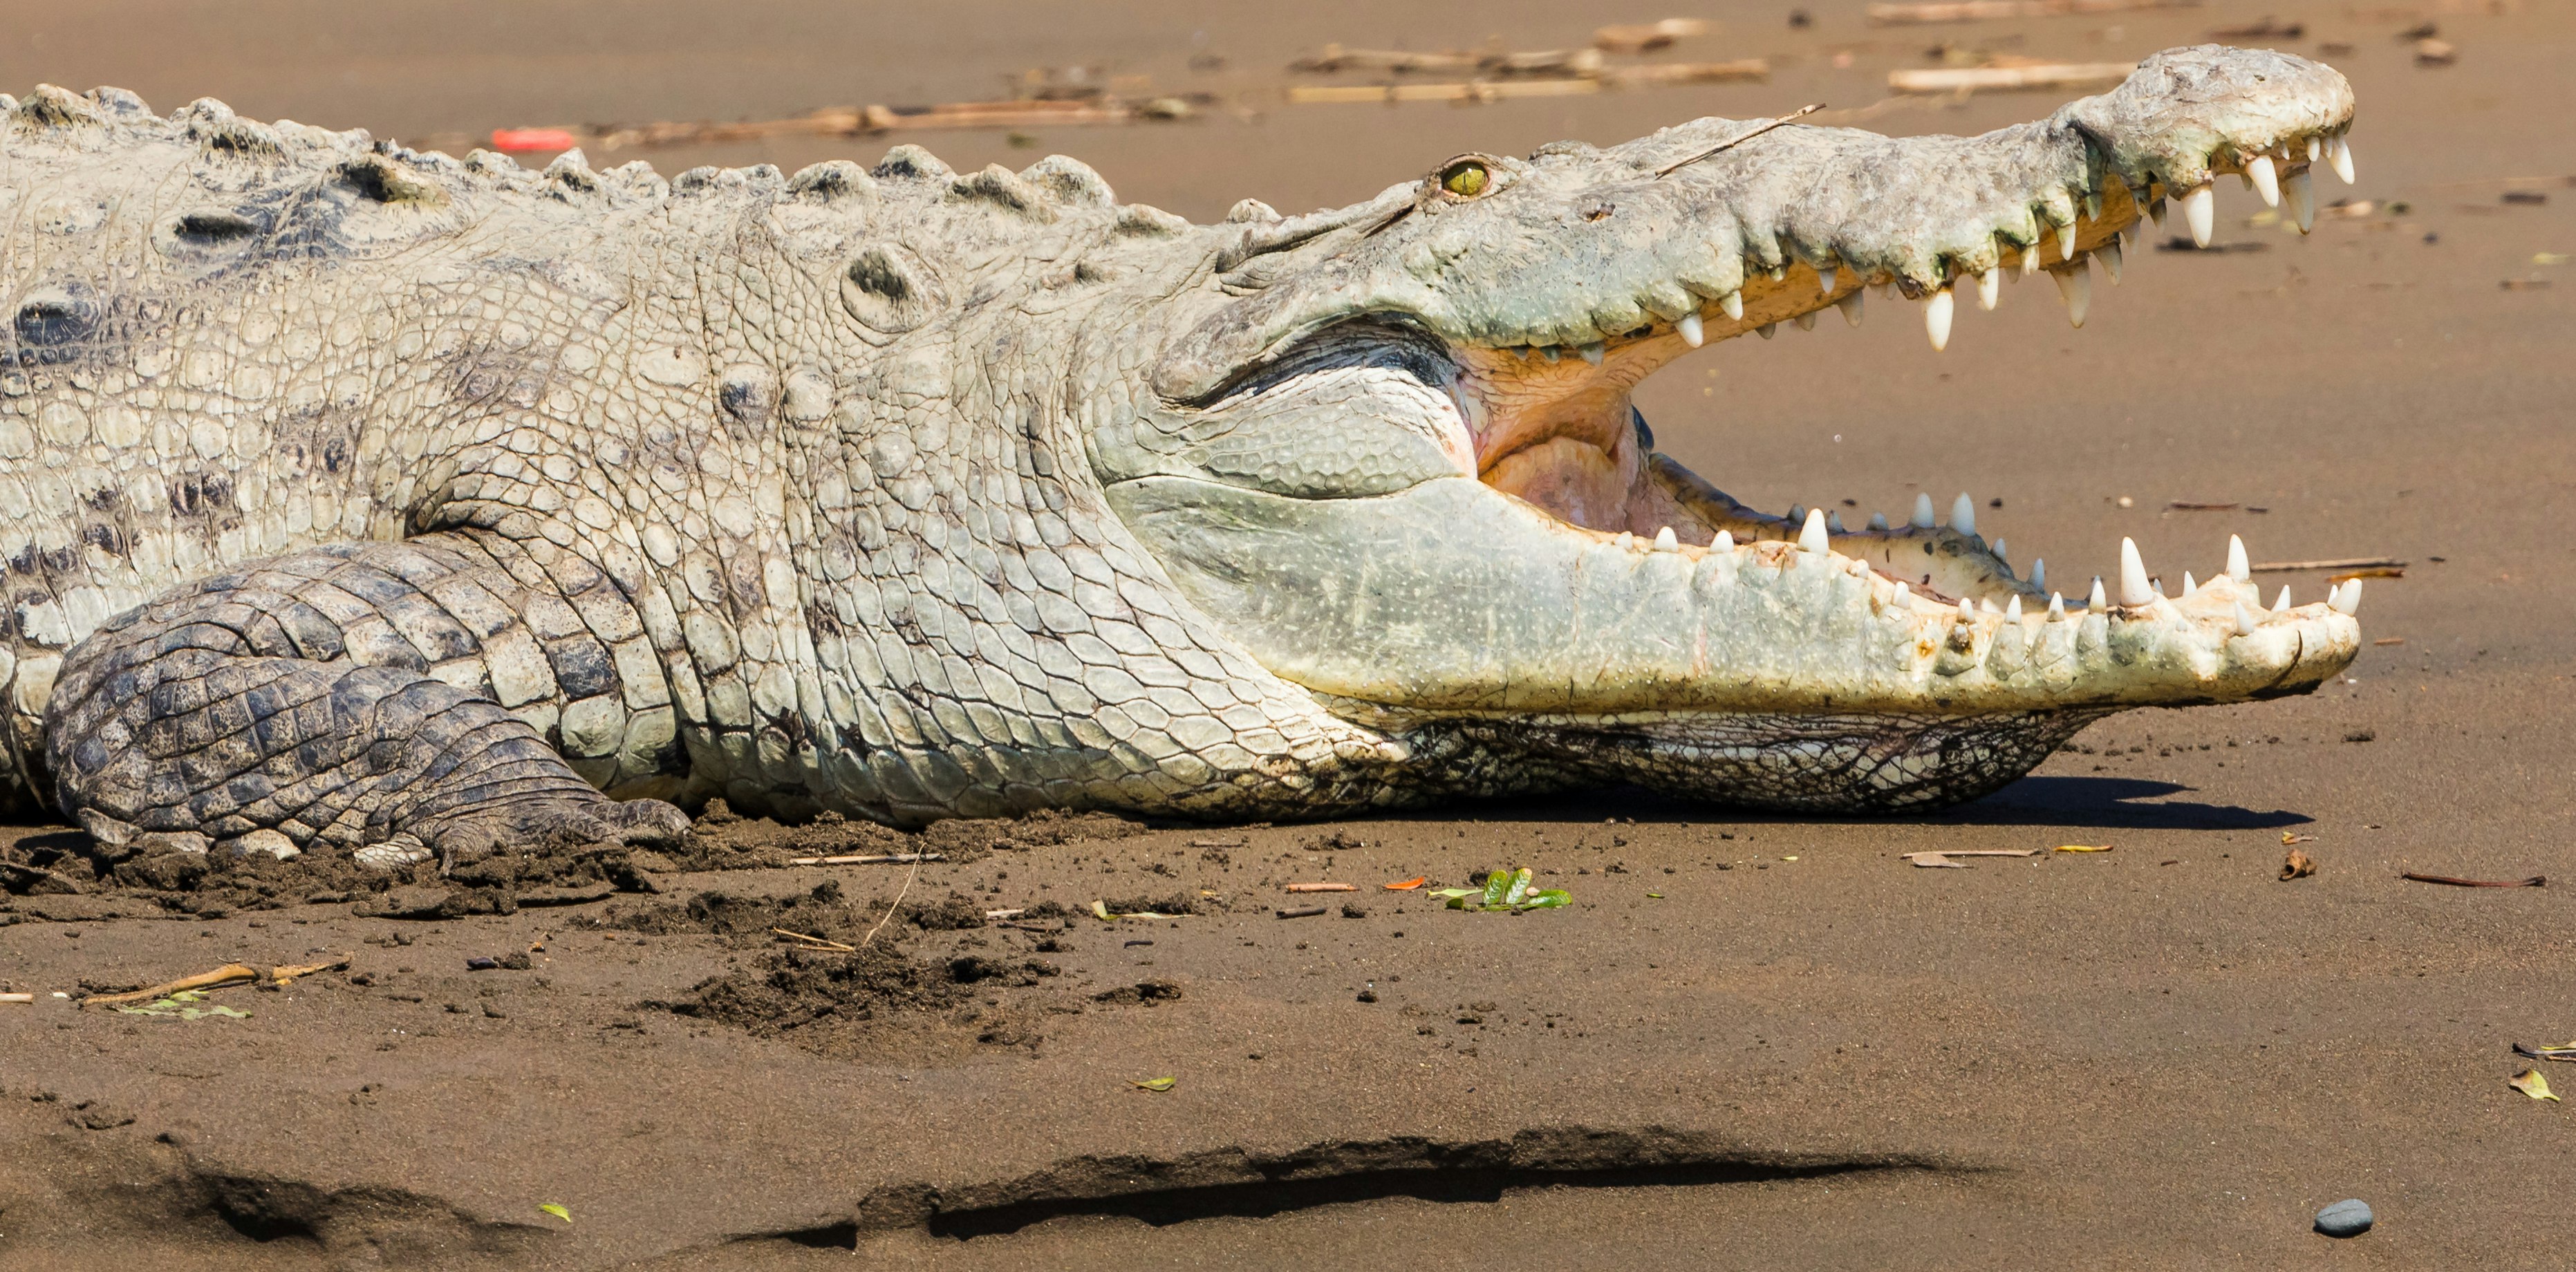 green crocodile with mouth open